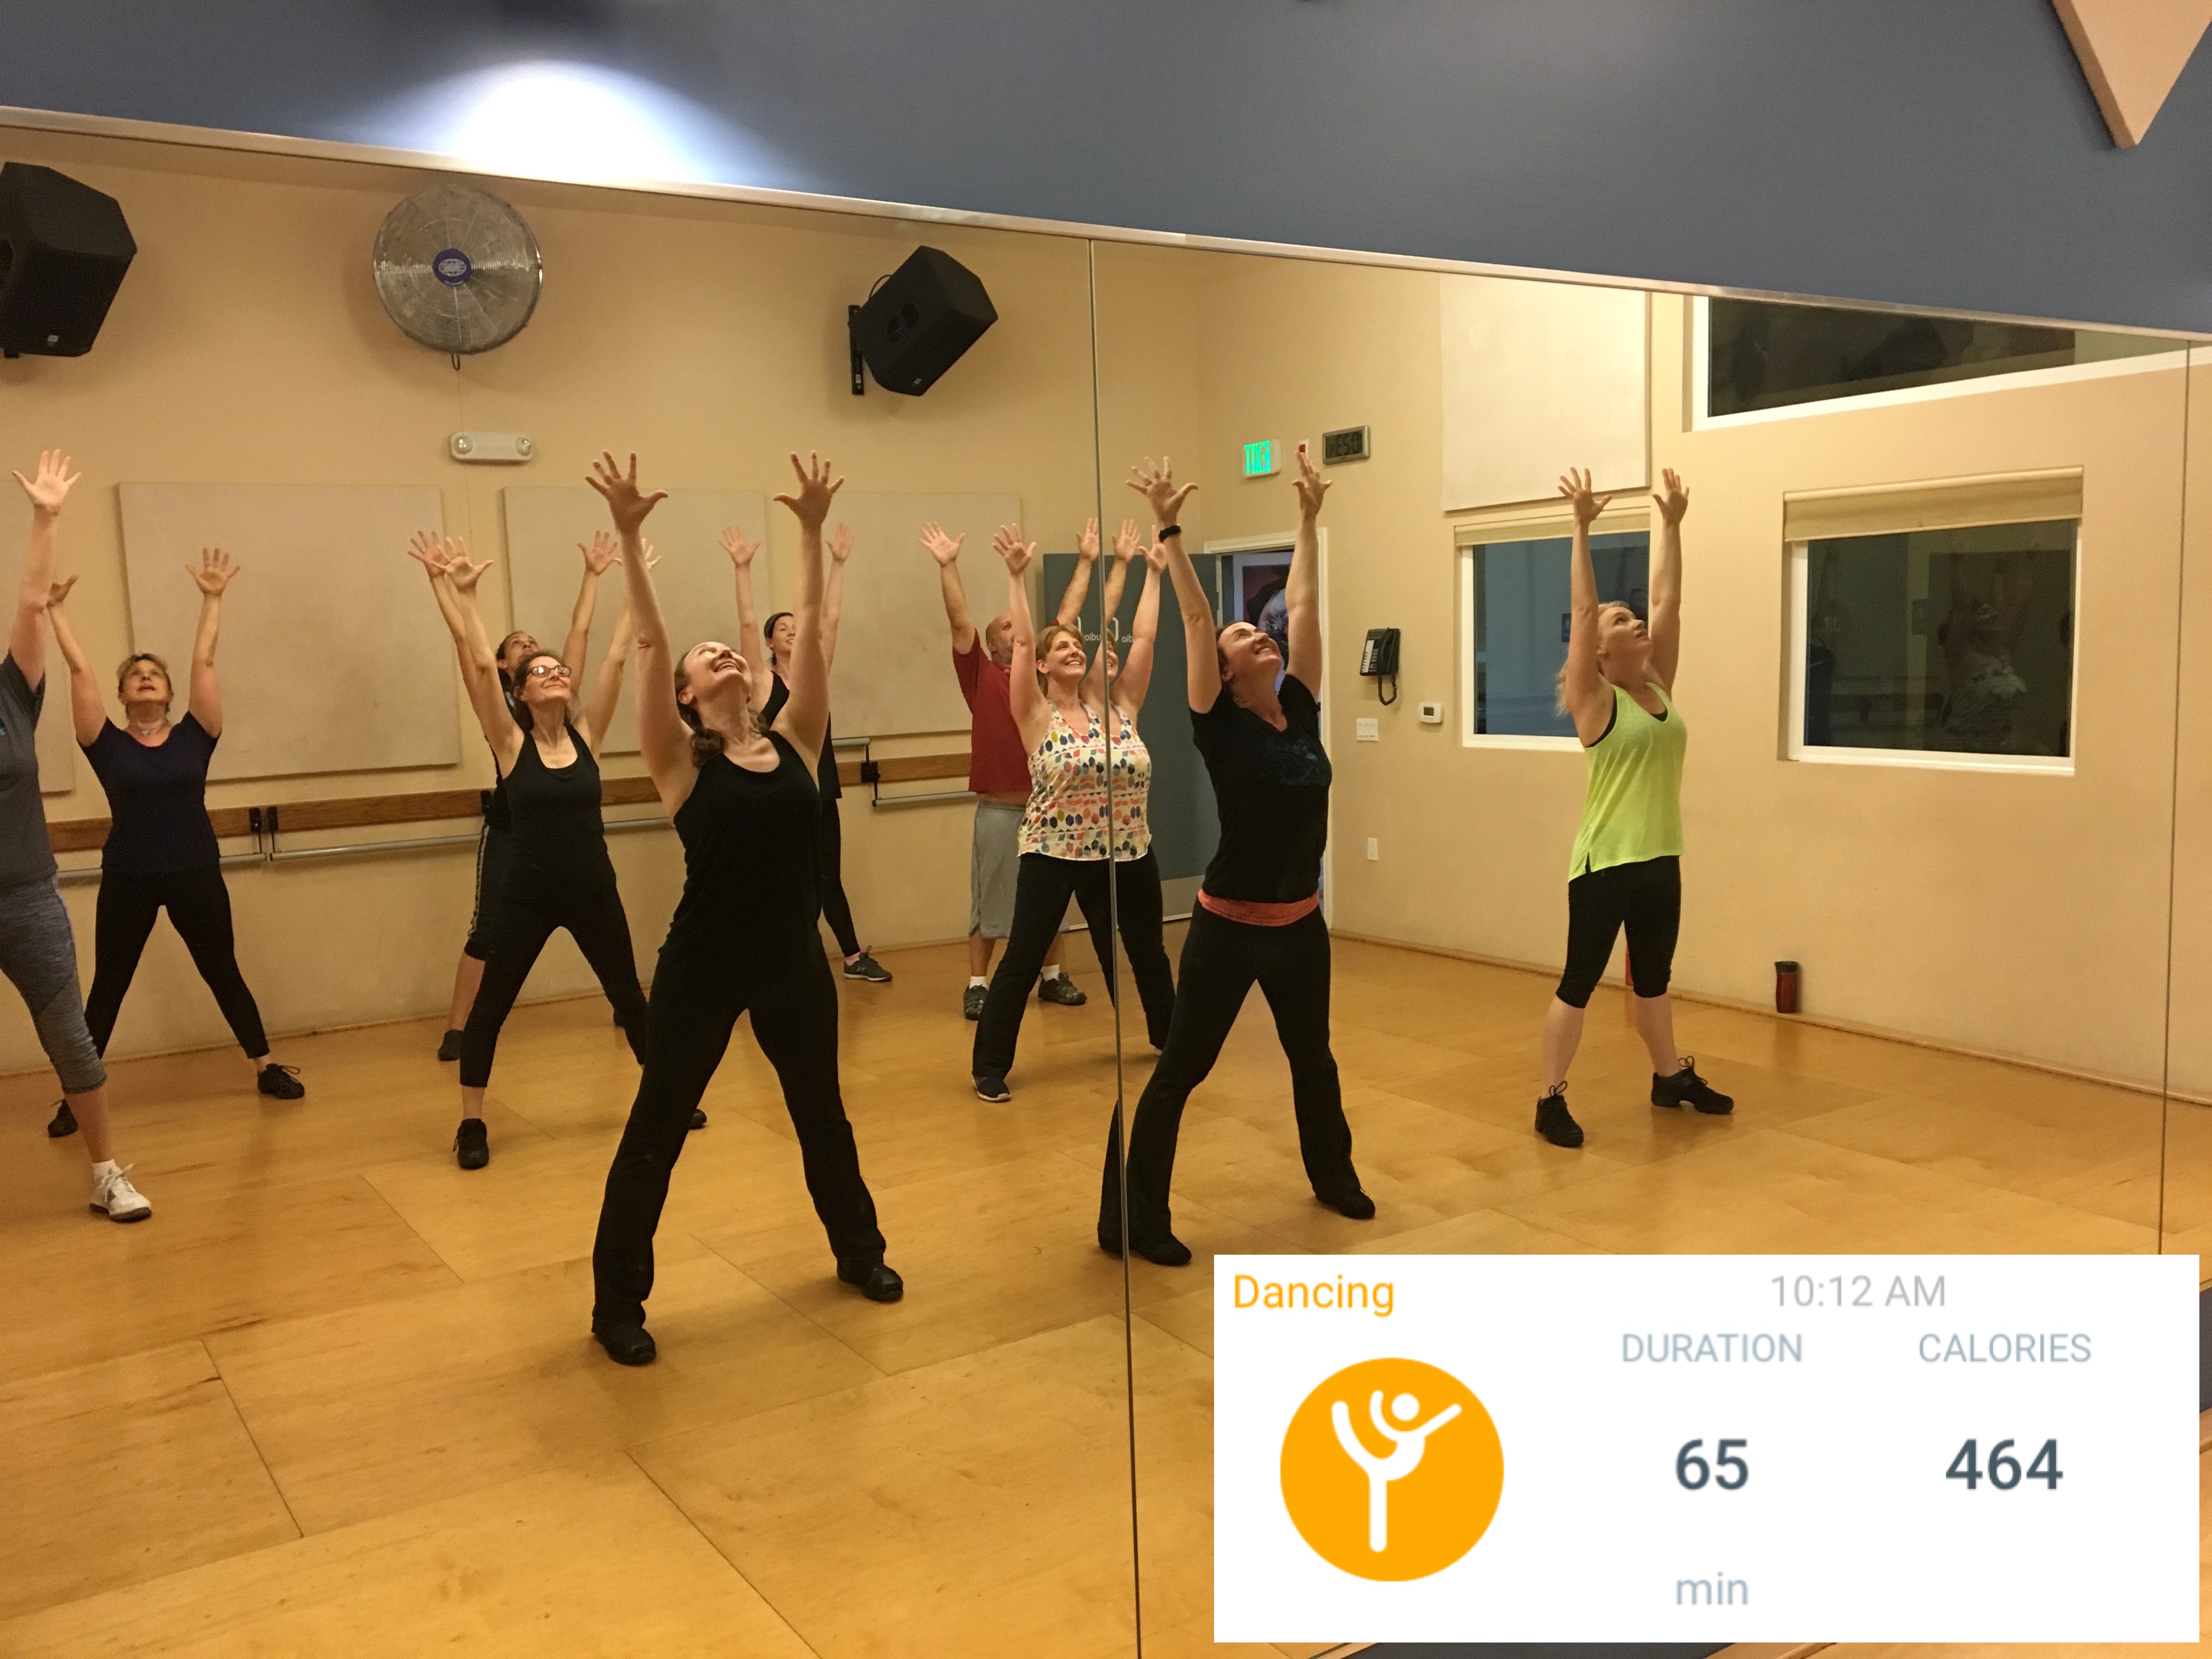 An uplifting moment from Jeanne Simpson's <i>Choreo-bics</i> class”/><figcaption>An uplifting moment from Jeanne Simpson’s <i>Choreo-bics</i> class</figcaption></figure>


<p>So far, we’ve been learning numbers from <i>Hairspray</i>, <i>Singing in the Rain</i>, <i>Fosse</i>, and <i>West Side Story,</i> in the style of choreographers Bob Fosse, Jerome Robbins, Gene Kelly, and Jerry Mitchell. Once we get the dance steps down, we progress to dancing the steps as a specific character from the show. For example, during one class my students transform into chorus girls from the 1920s, and in another, gang members from the 1950s.
<br>
I have students who have danced in multiple Broadway shows, and others who have never been to a dance class before, so I take the Broadway numbers and choreograph my own versions, incorporating a few steps from the original dances plus my own steps that teach the essence of each choreographer’s style. Some of my students have said that learning each dance is like learning a new language, because each choreographer’s style of movement is so unique and specific.</p>

<figure class=